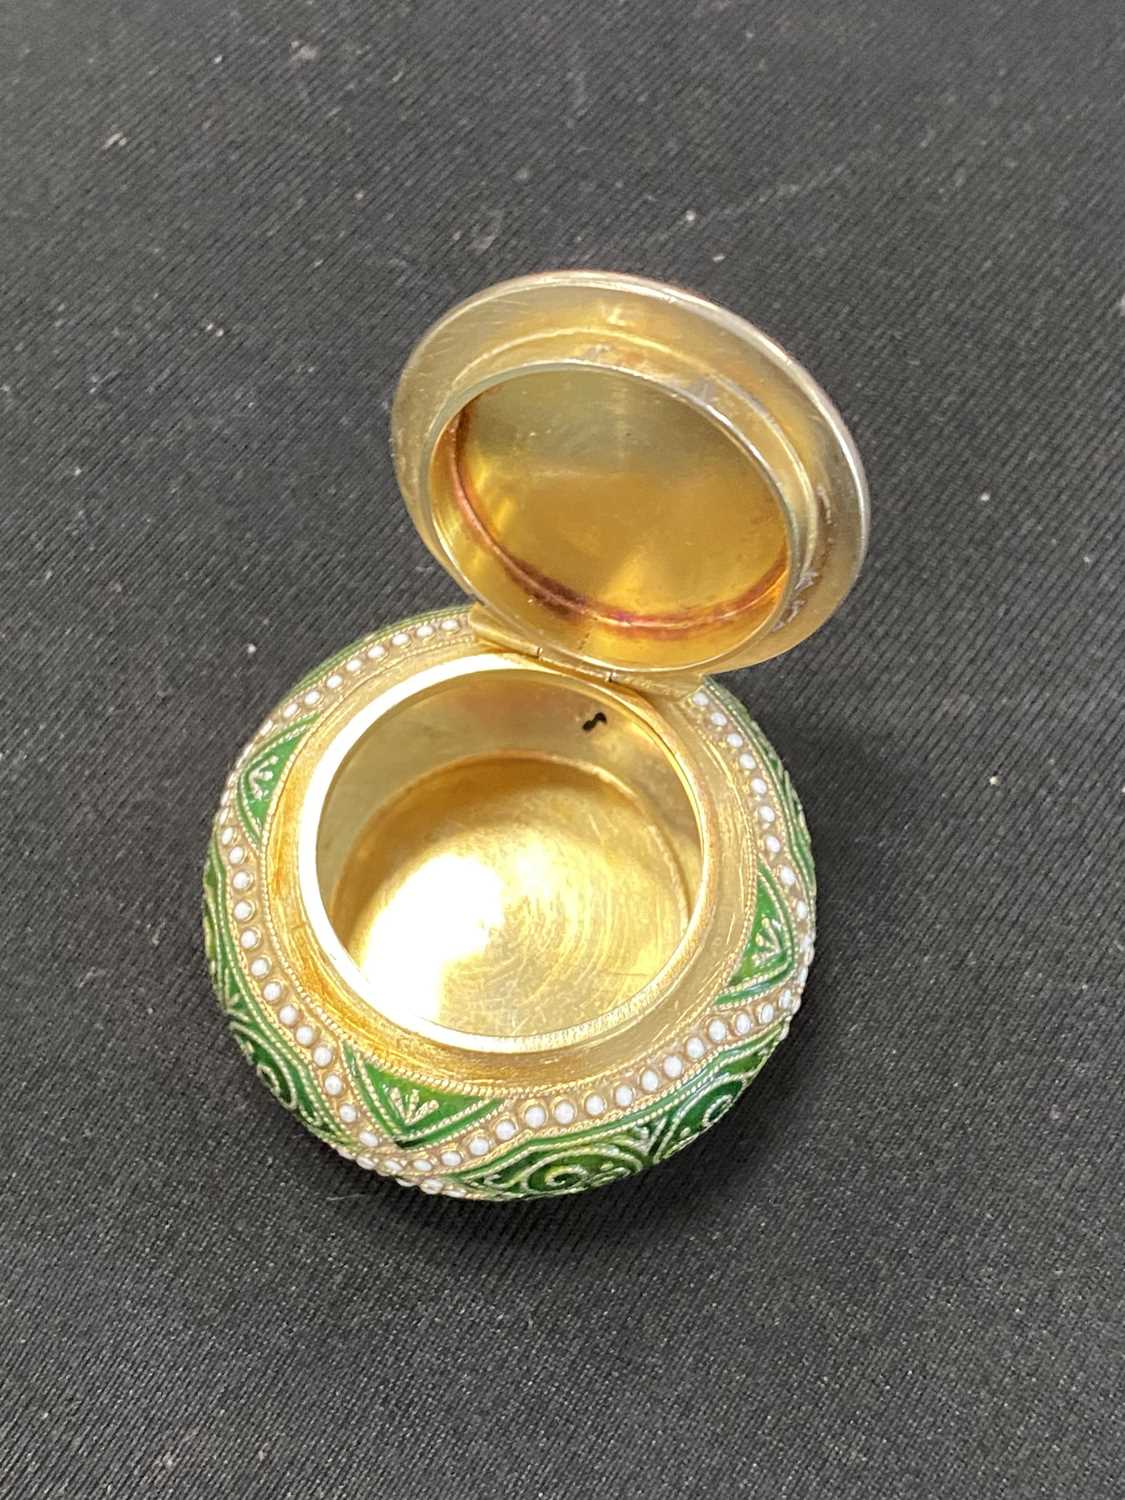 A Norwegian silver gilt and enamel pill box by Marius Hammer - Image 6 of 15